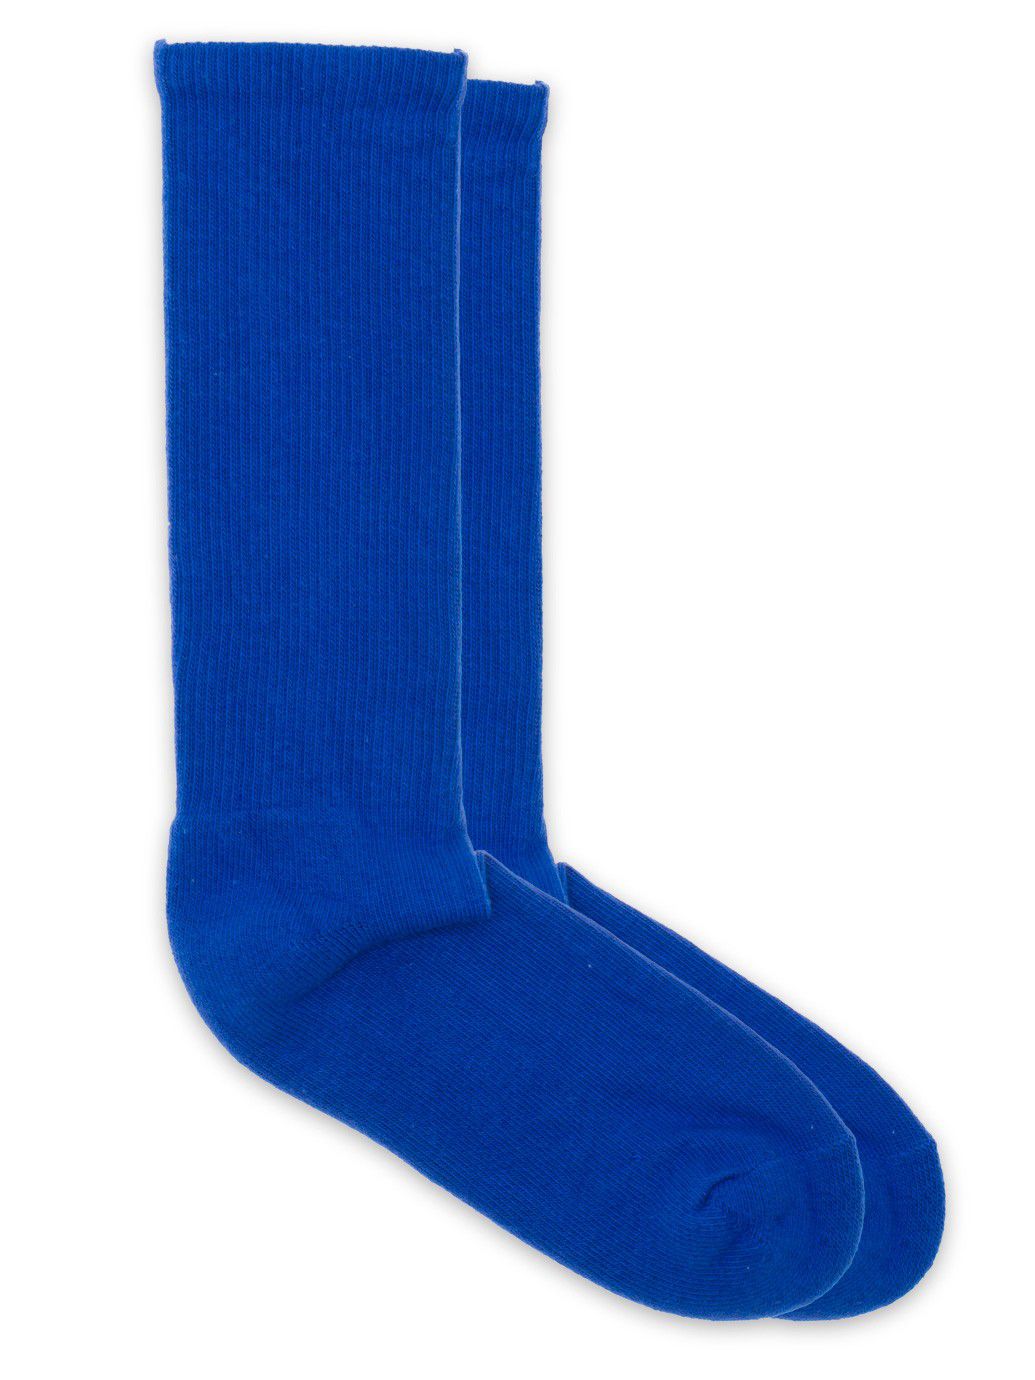 American Apparel - Chaussettes (9 €)